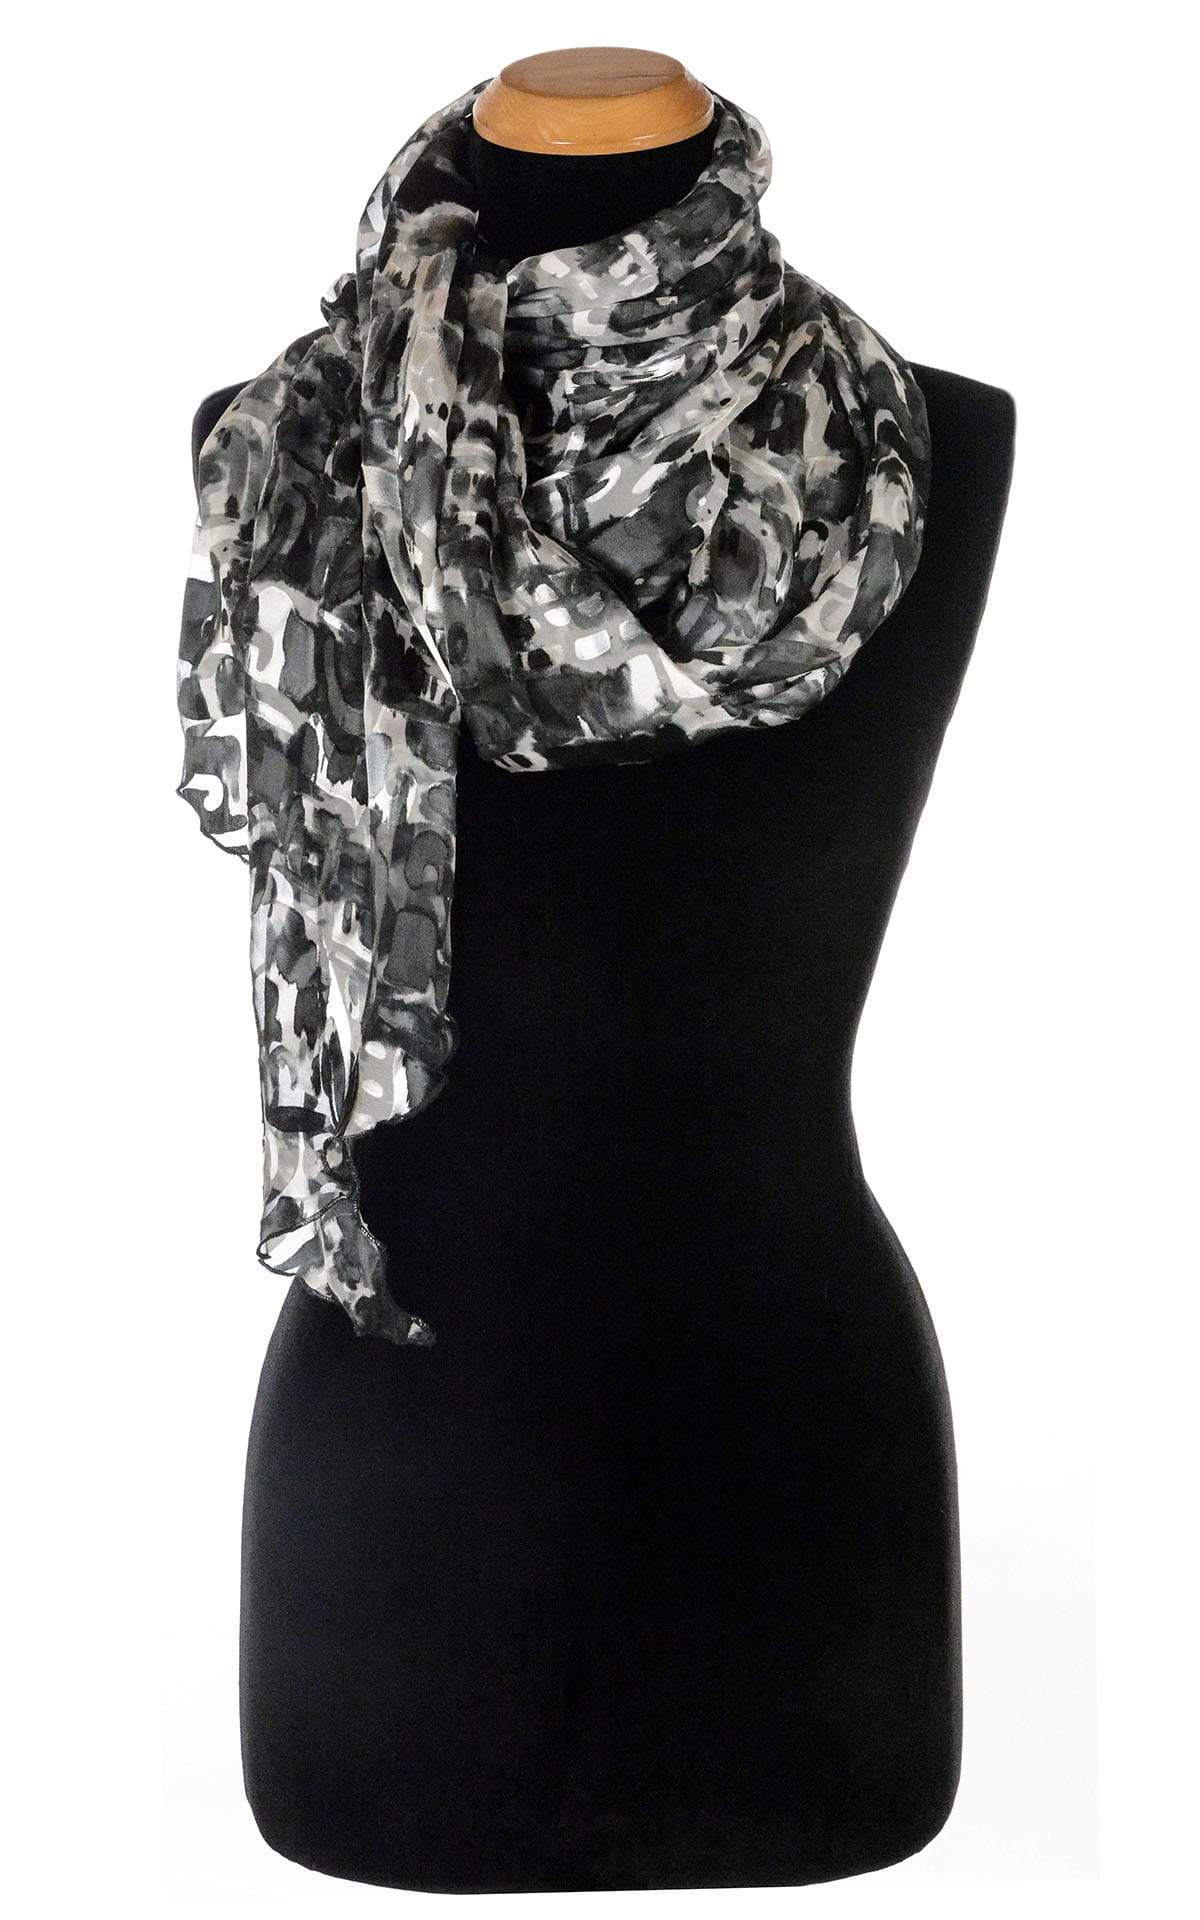 Ladies Large Handkerchief Scarf, Wrap in hand-painted silk on a mannequin shown in side loop | Garden Path in Sand Dollar  black, Gray, and Ivory print | Handmade in Seattle WA | Pandemonium Millinery